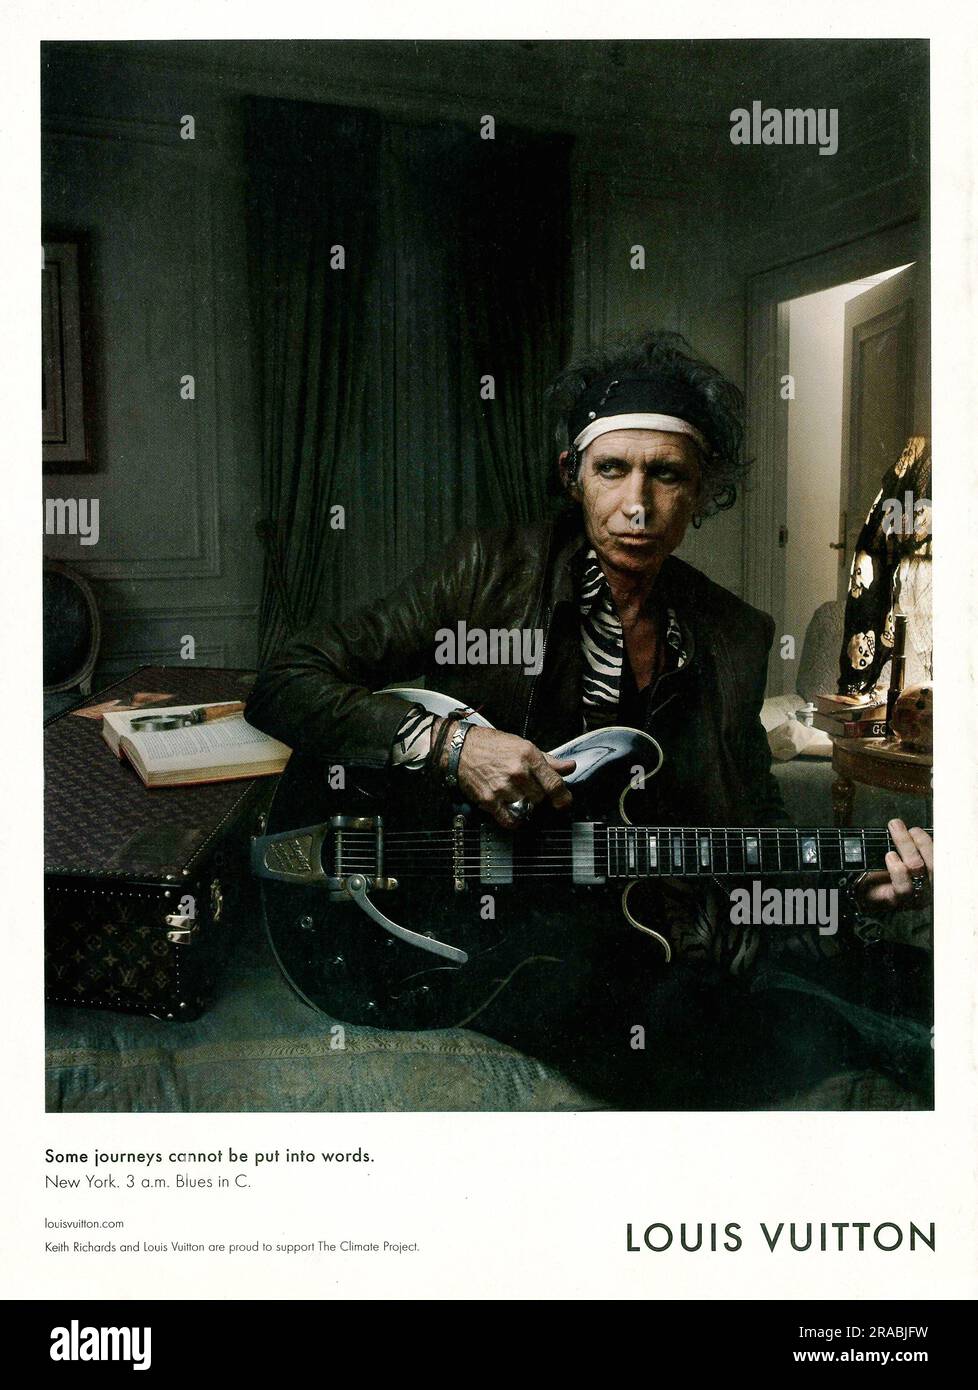 Keith Richards and Louis Vuitton are proud to support the Climate